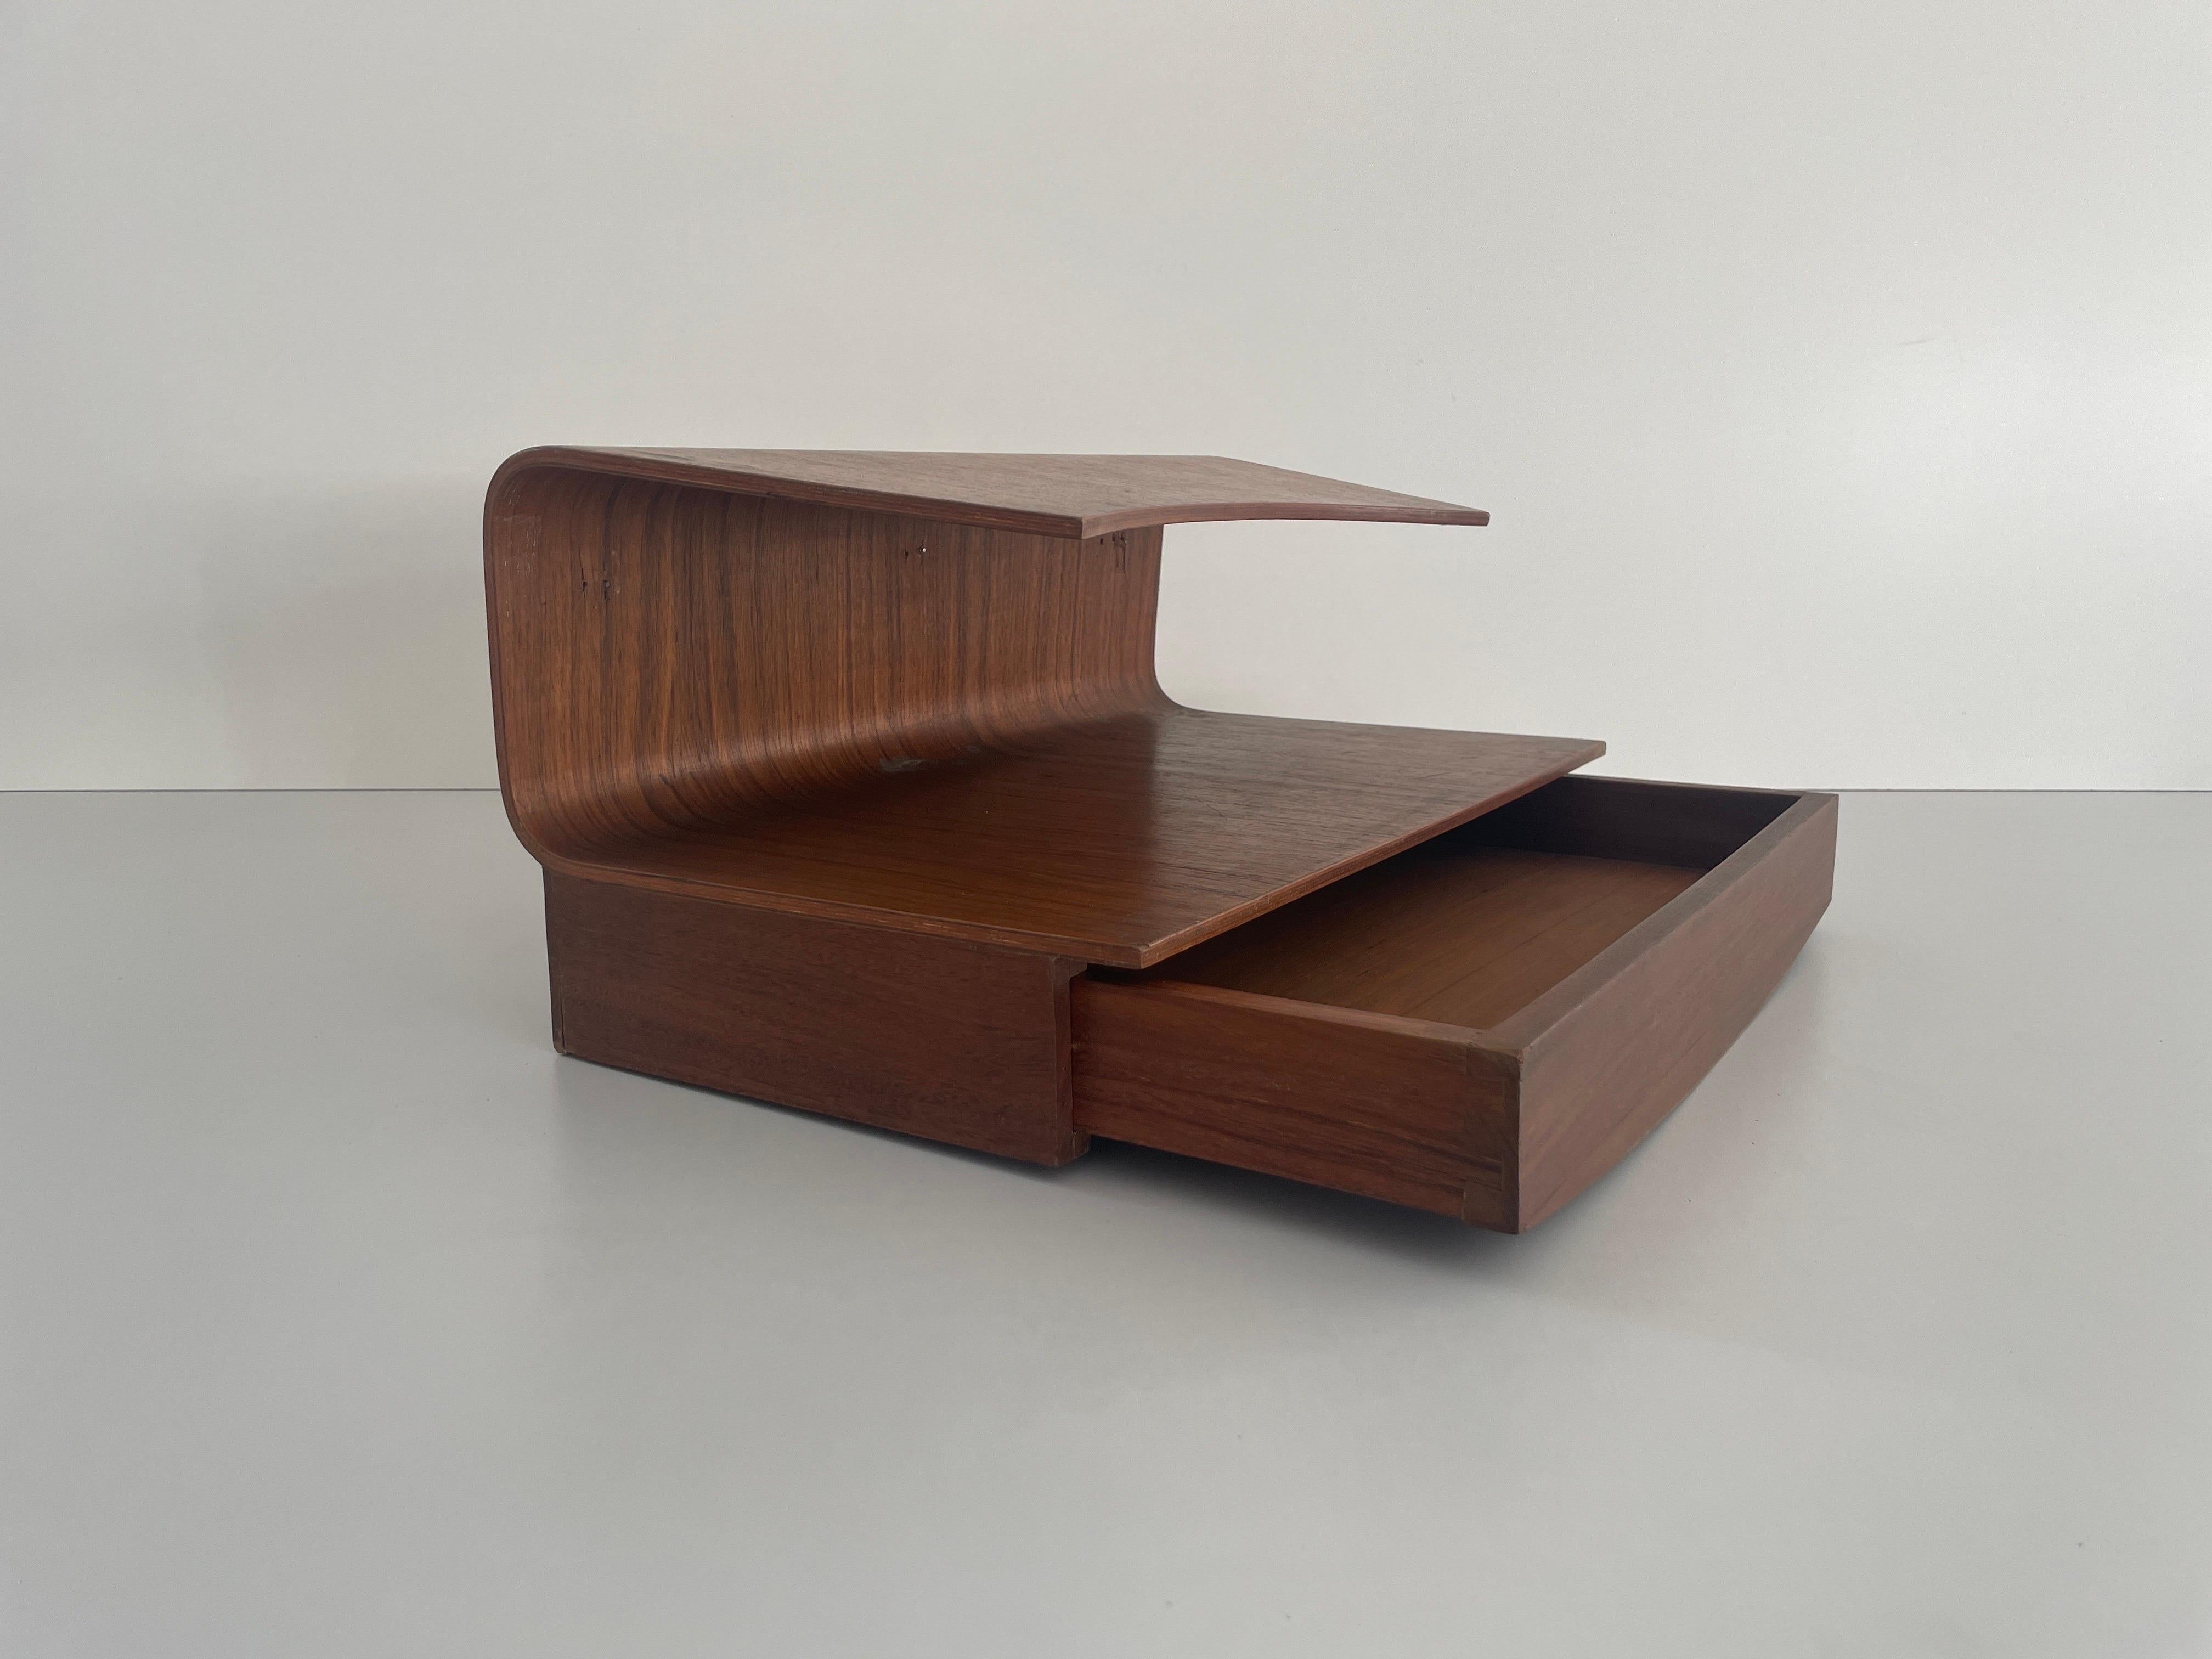 Italian Wood Floating Shelf with Drawer, 1960s, Italy For Sale 6